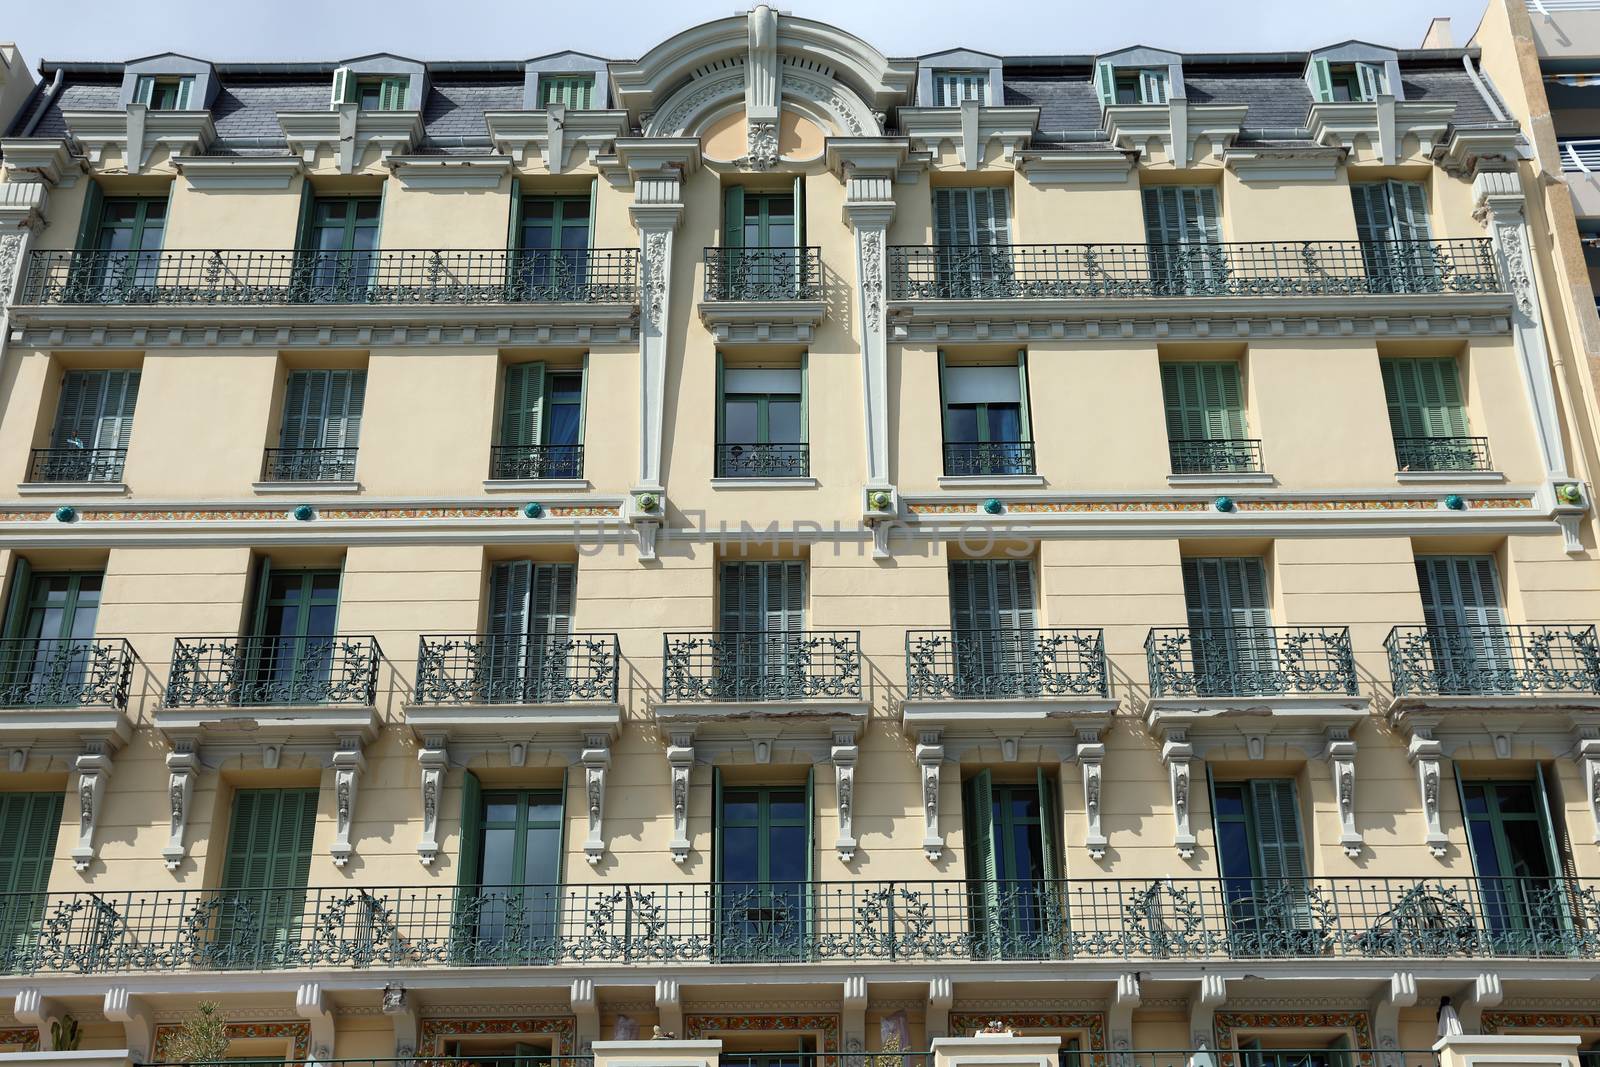 Facade of Traditional Building of French Riviera With Many Windows And Balconies